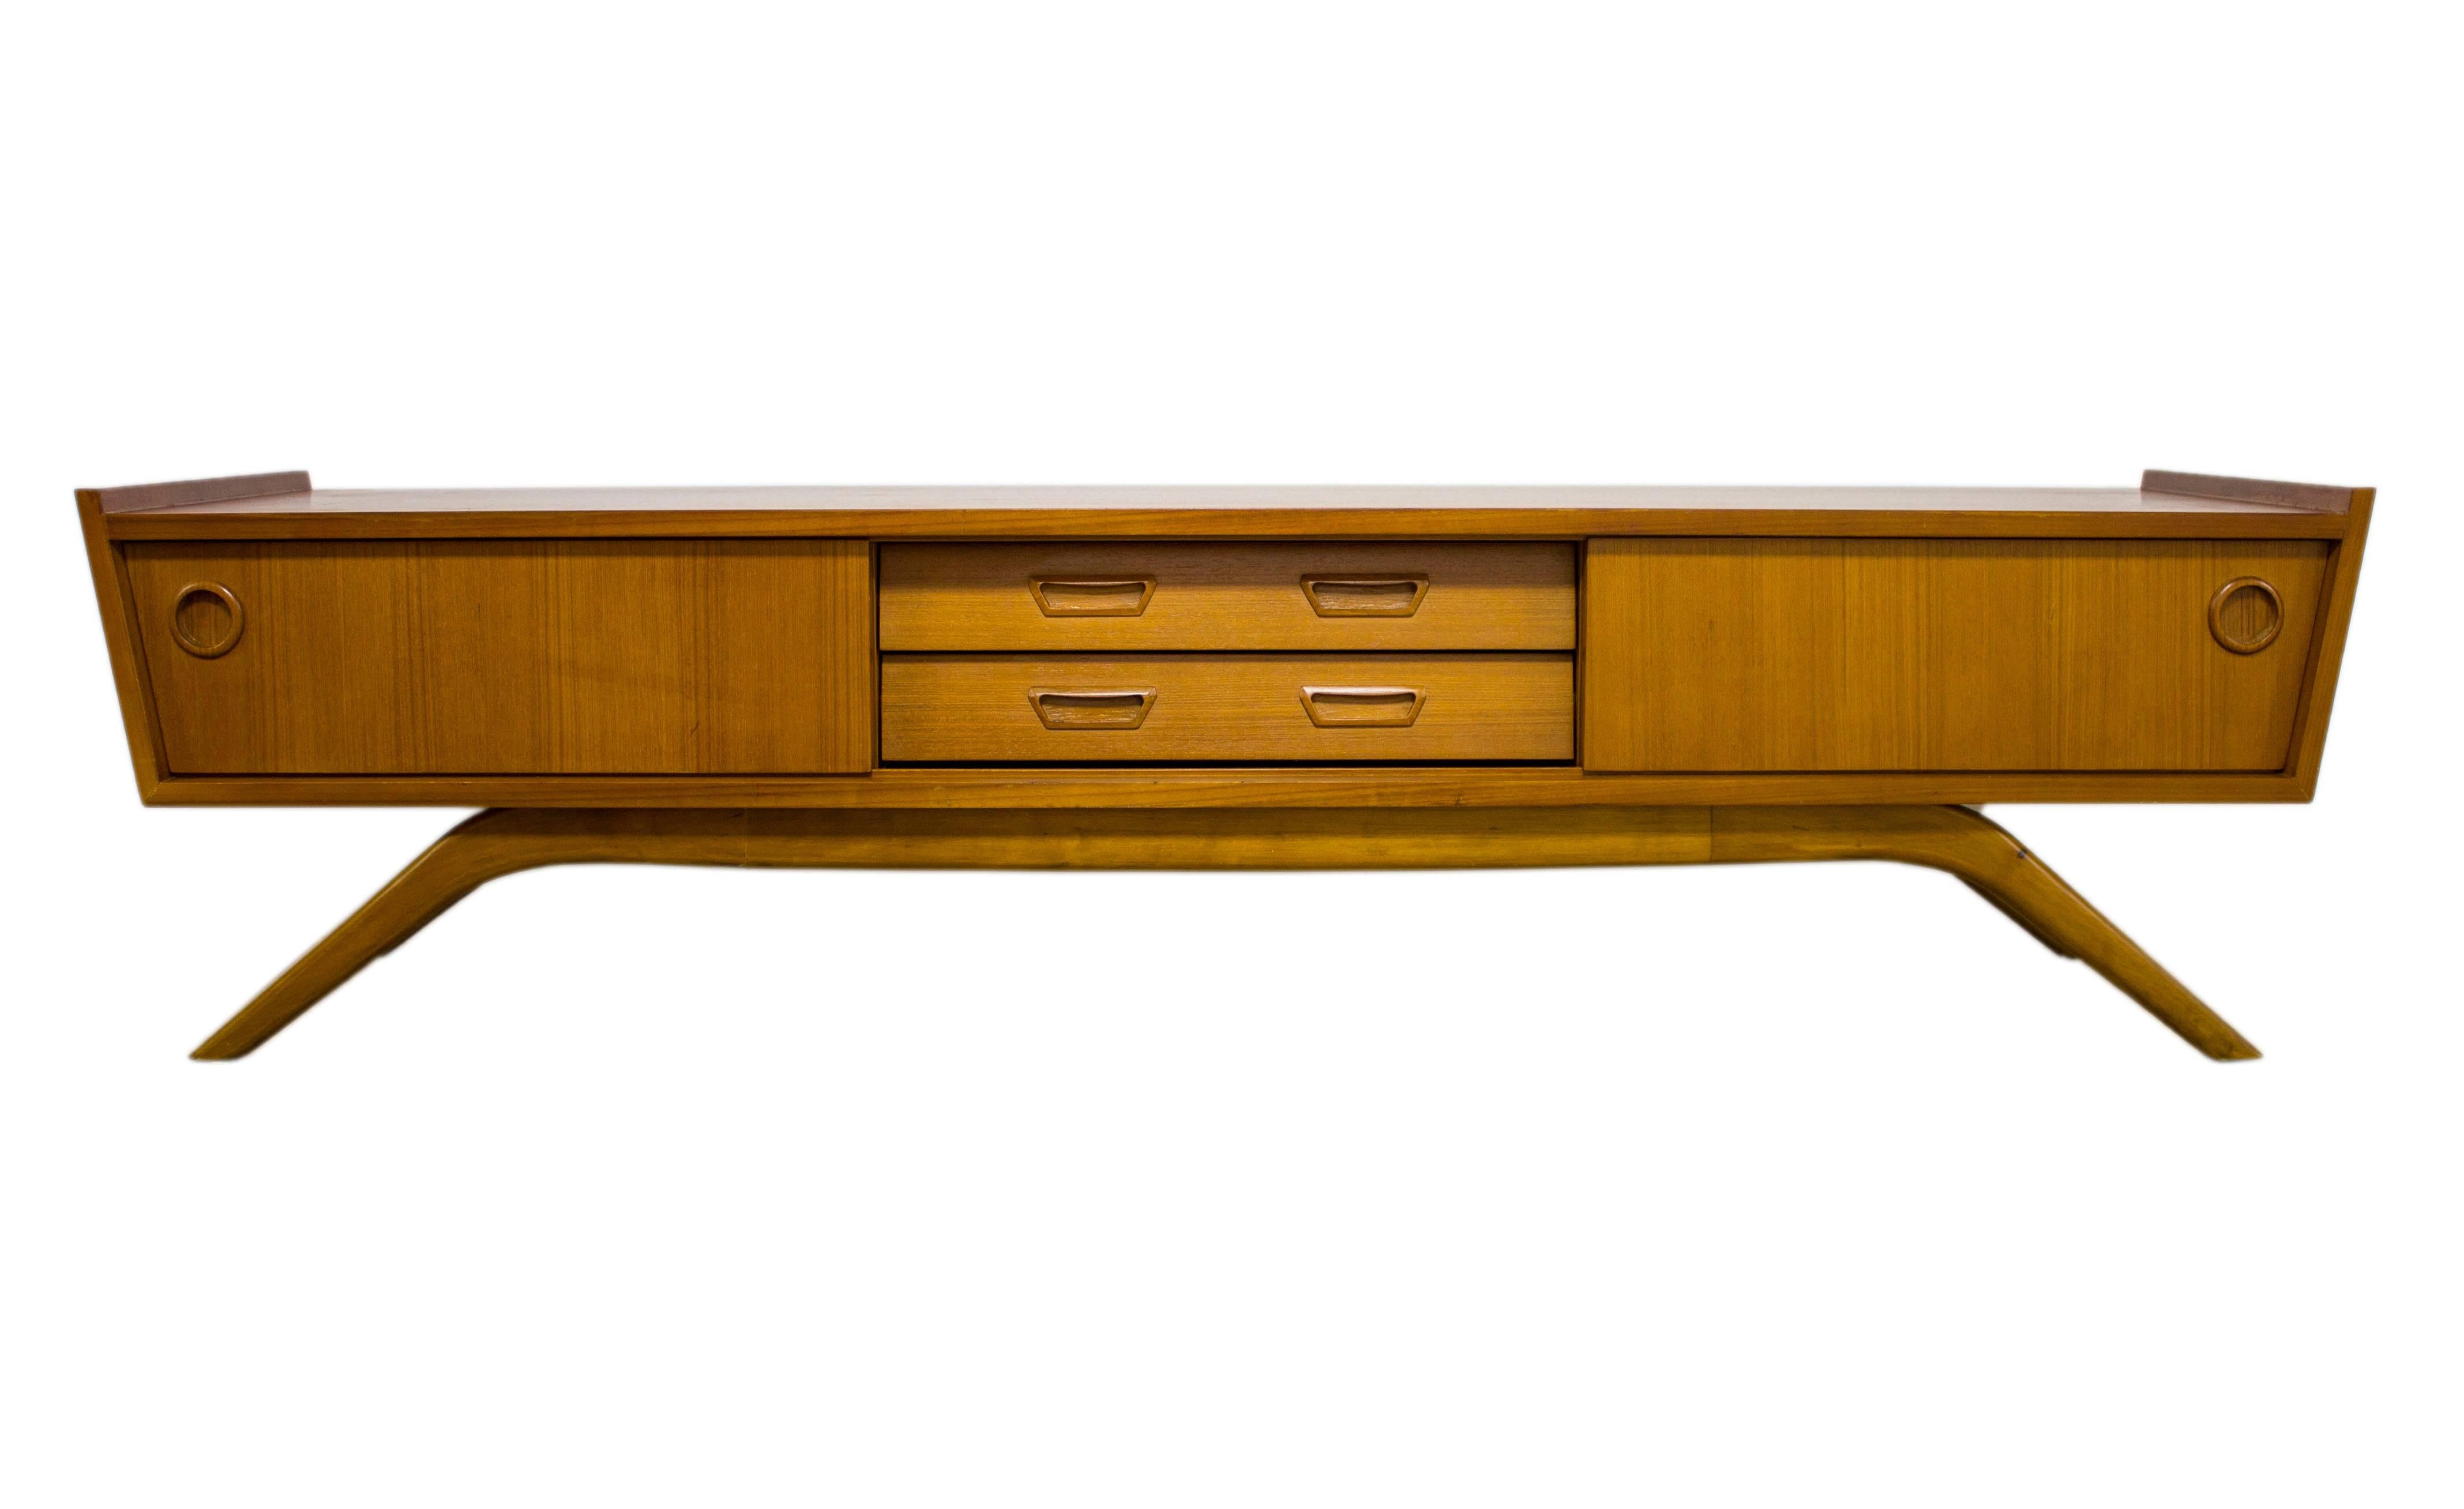 The Danish designers of the midcentury movement brought clean, simple lines to the masses and introduced the world to the wonders of Teak in it’s many guises, stunning grain and rich colors.

This stunning low level sideboard with its organic